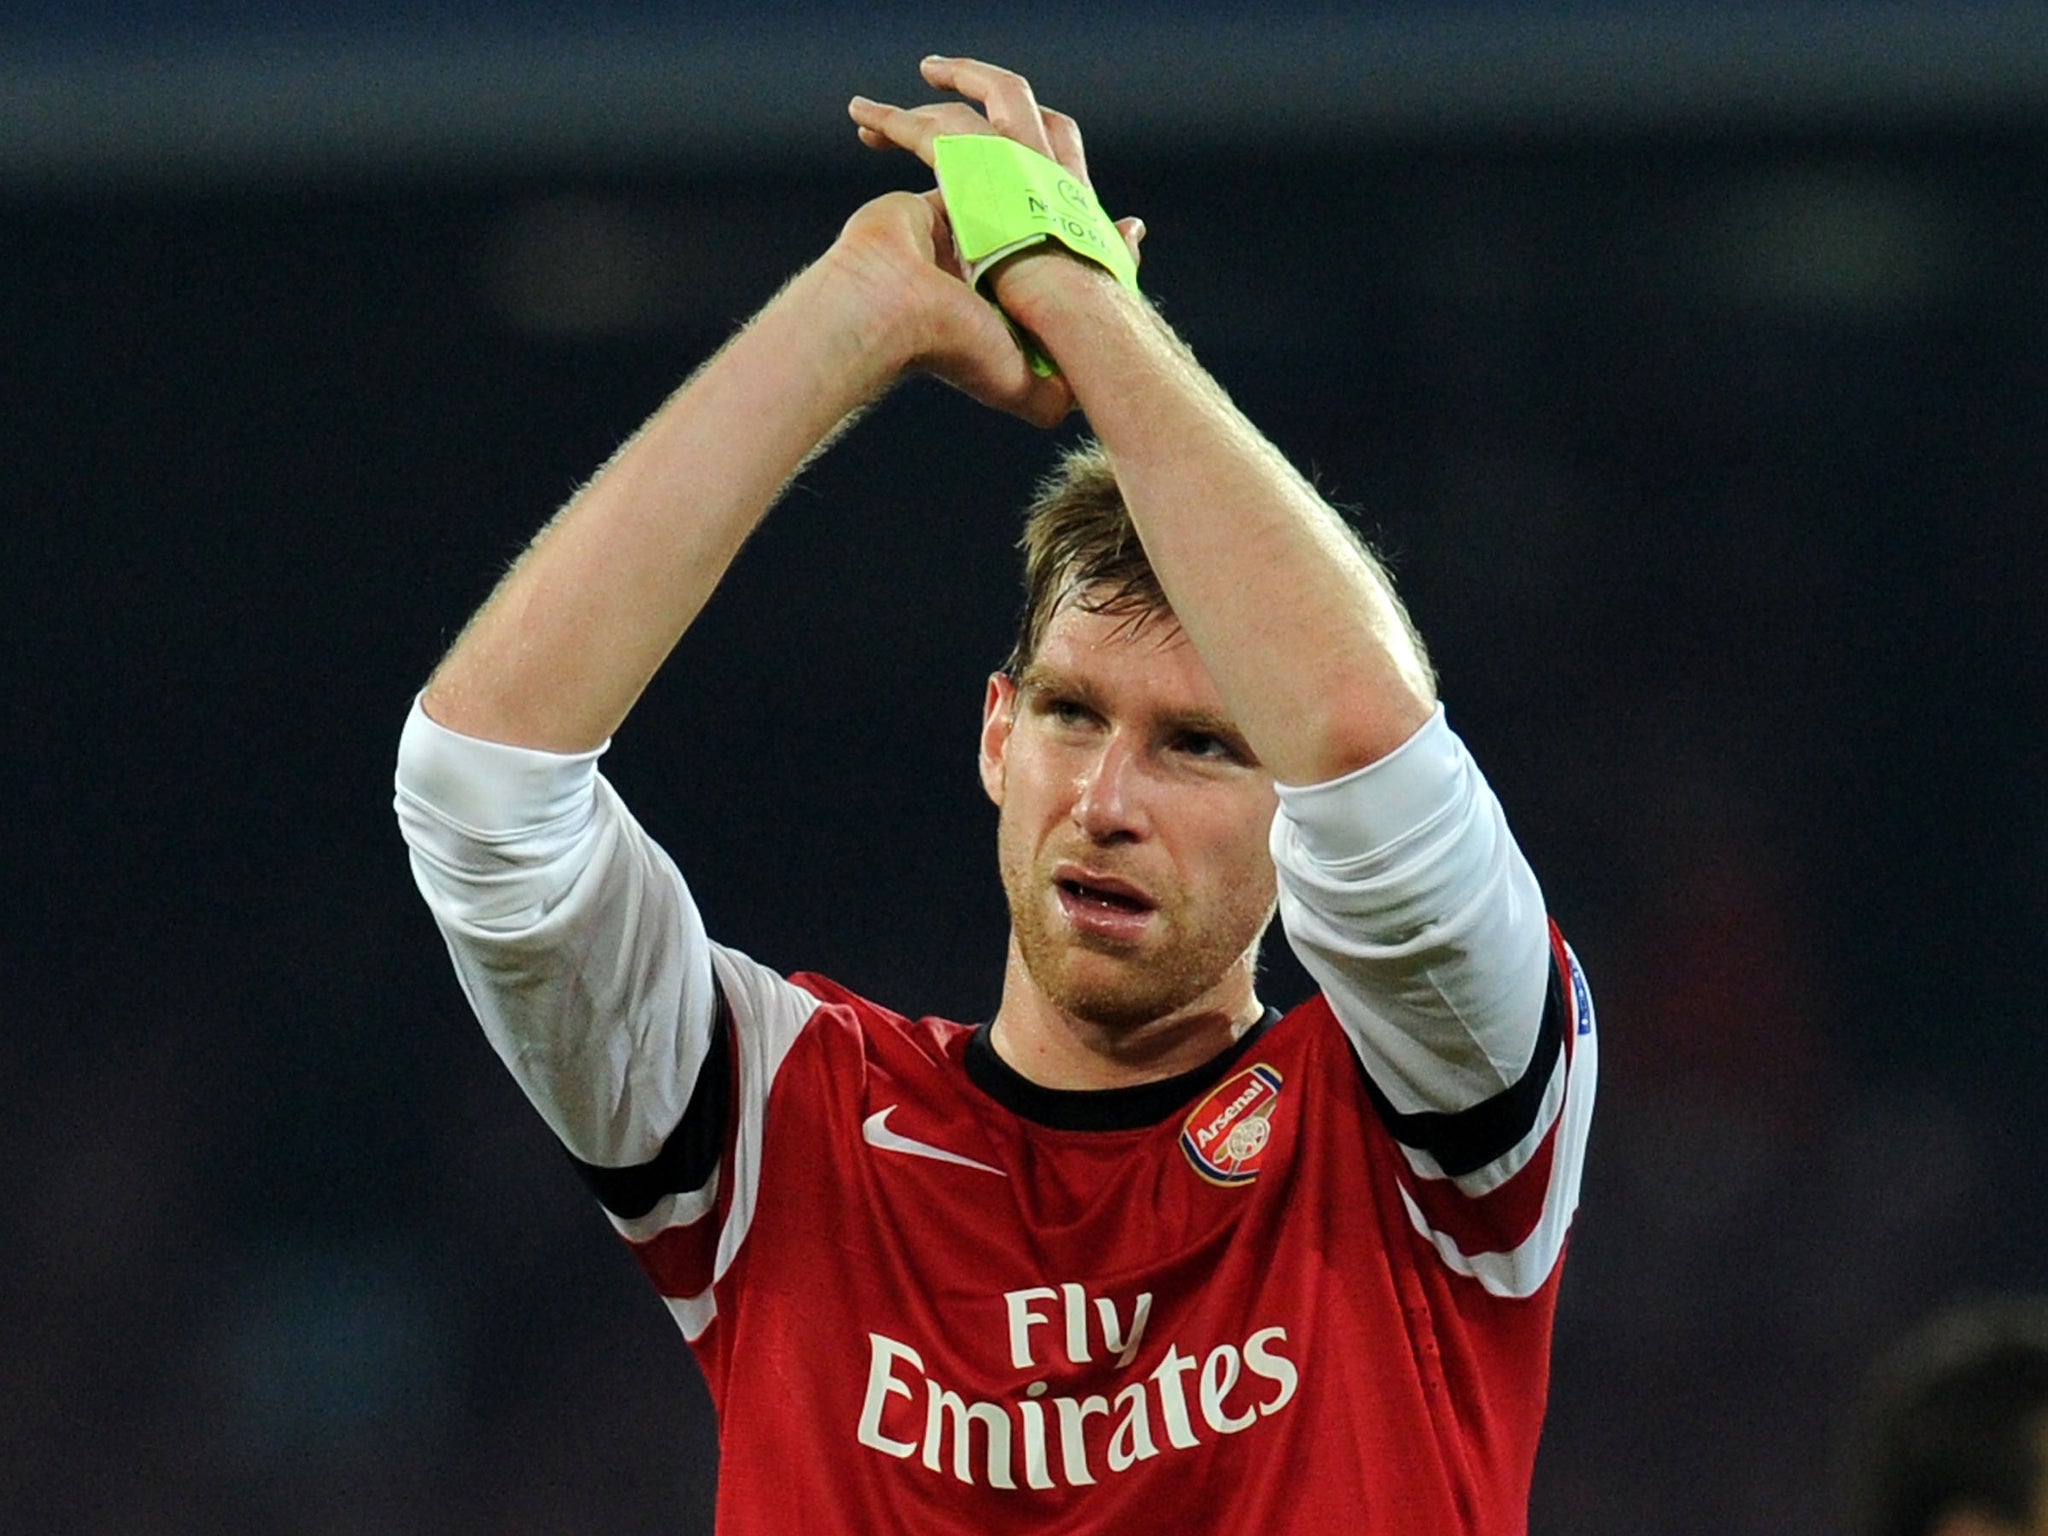 Arsenal defender Per Mertesacker believes Arsenal can compete with Europe's best ahead of the Champions League draw